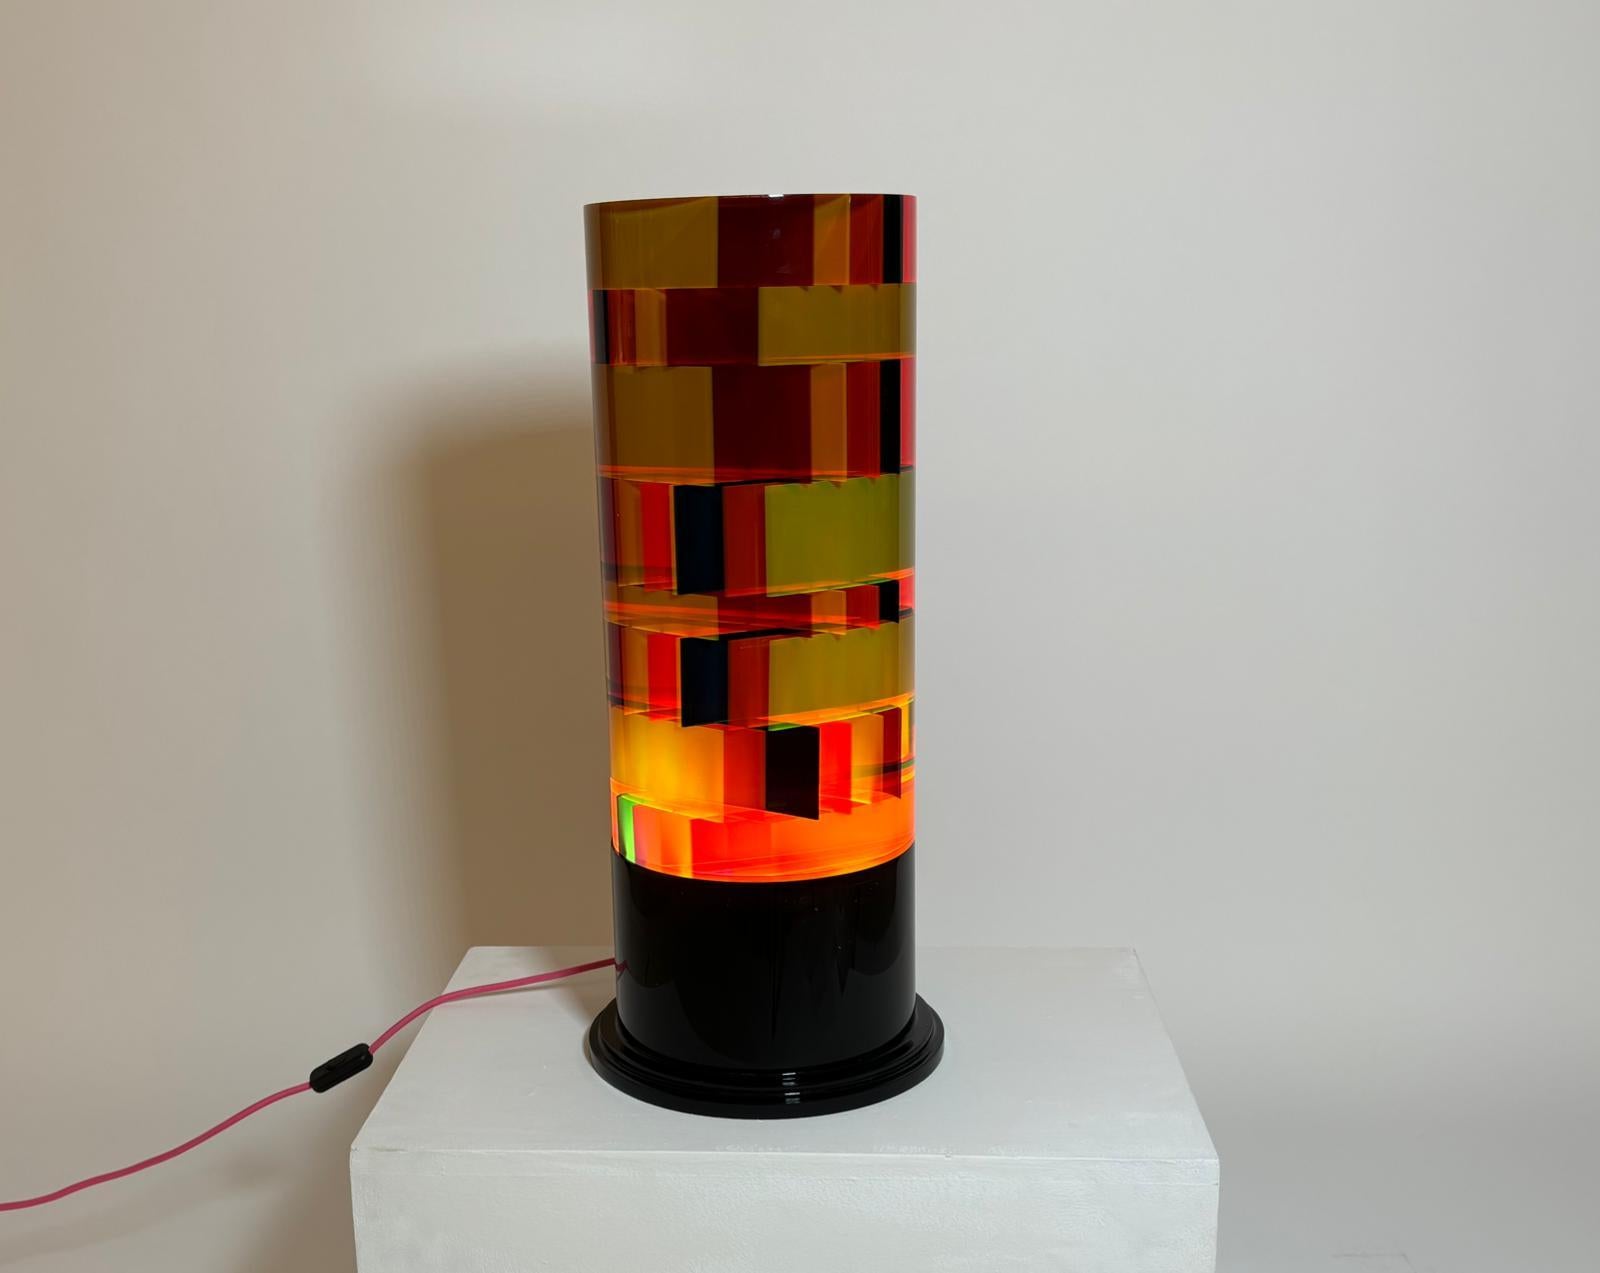 Table Lamp Plexiglass DNA model designed by Studio Superego for Superego Editions. 
 
Biography
Superego editions was born in 2006, performing a constant activity of research in decorative arts by offering both contemporary and vintage works,